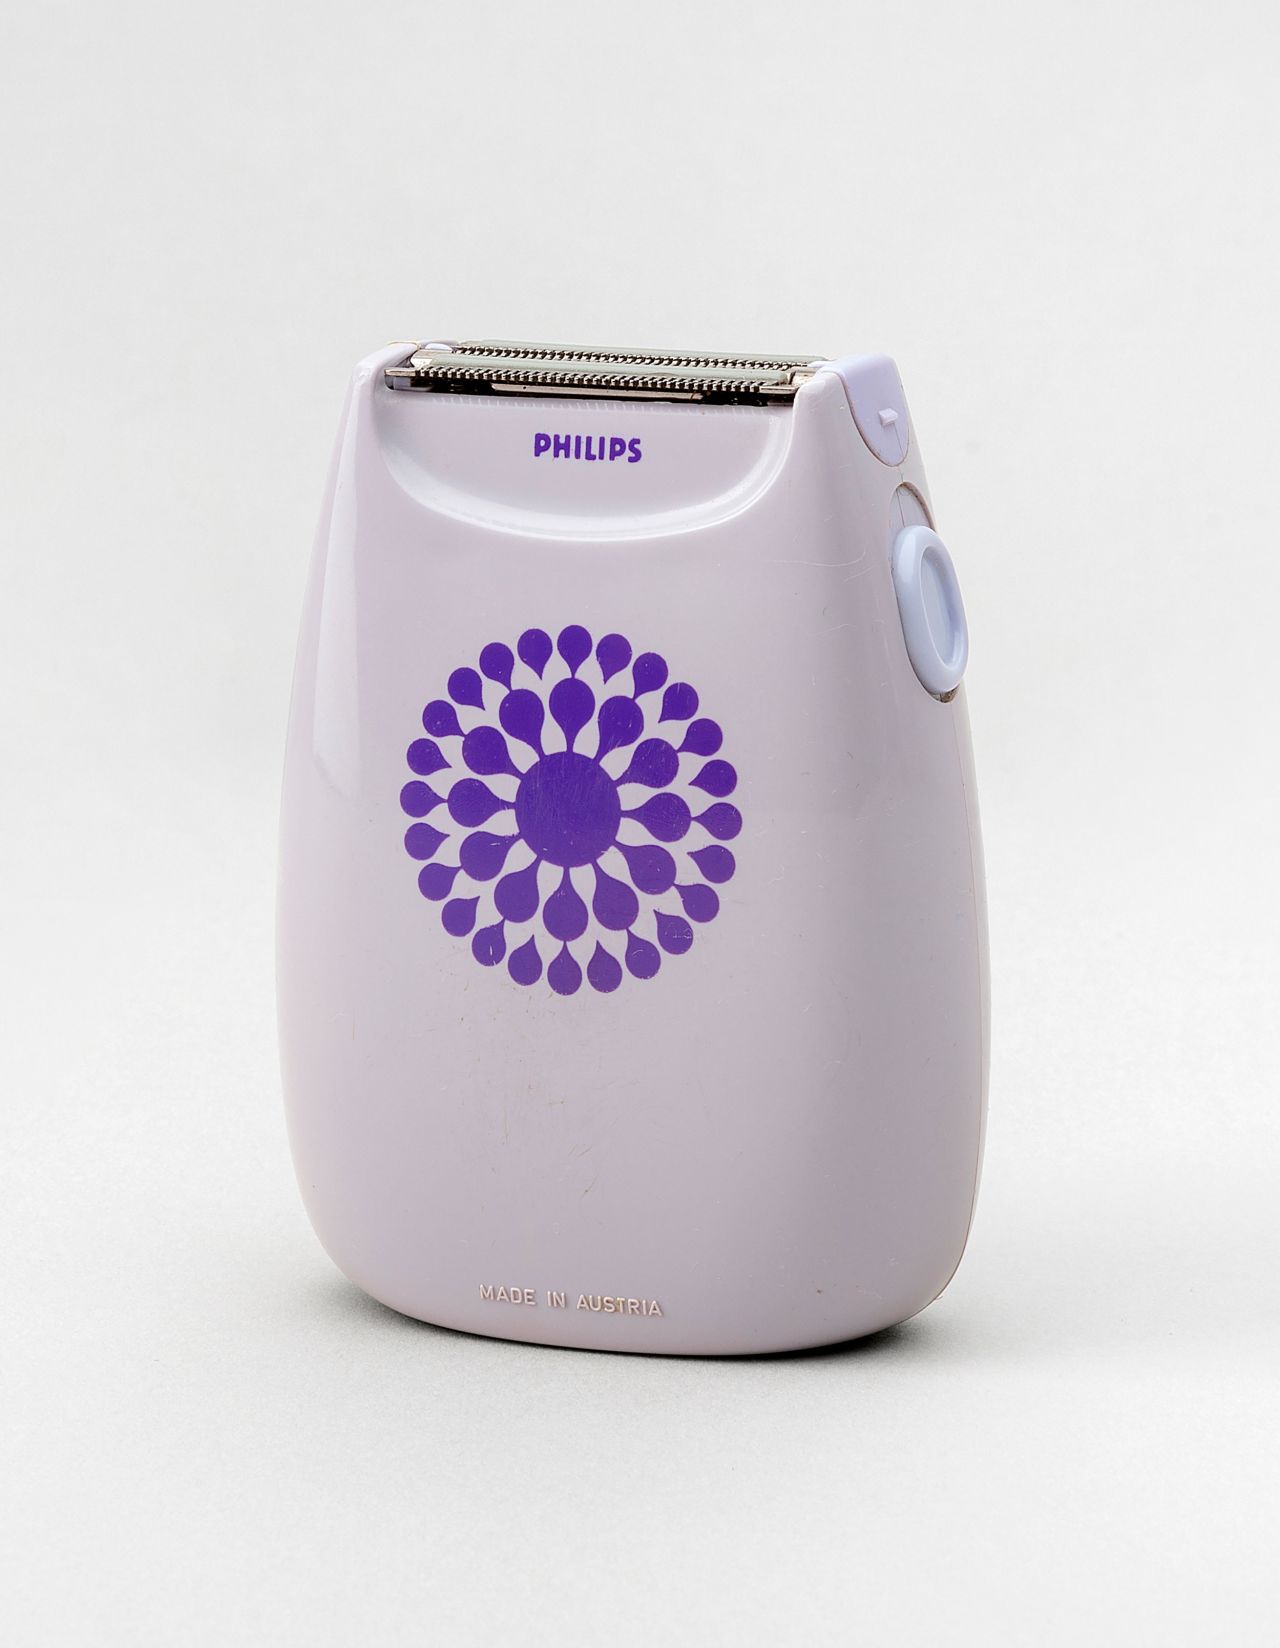 The Philips Ladyshave HP 2111.